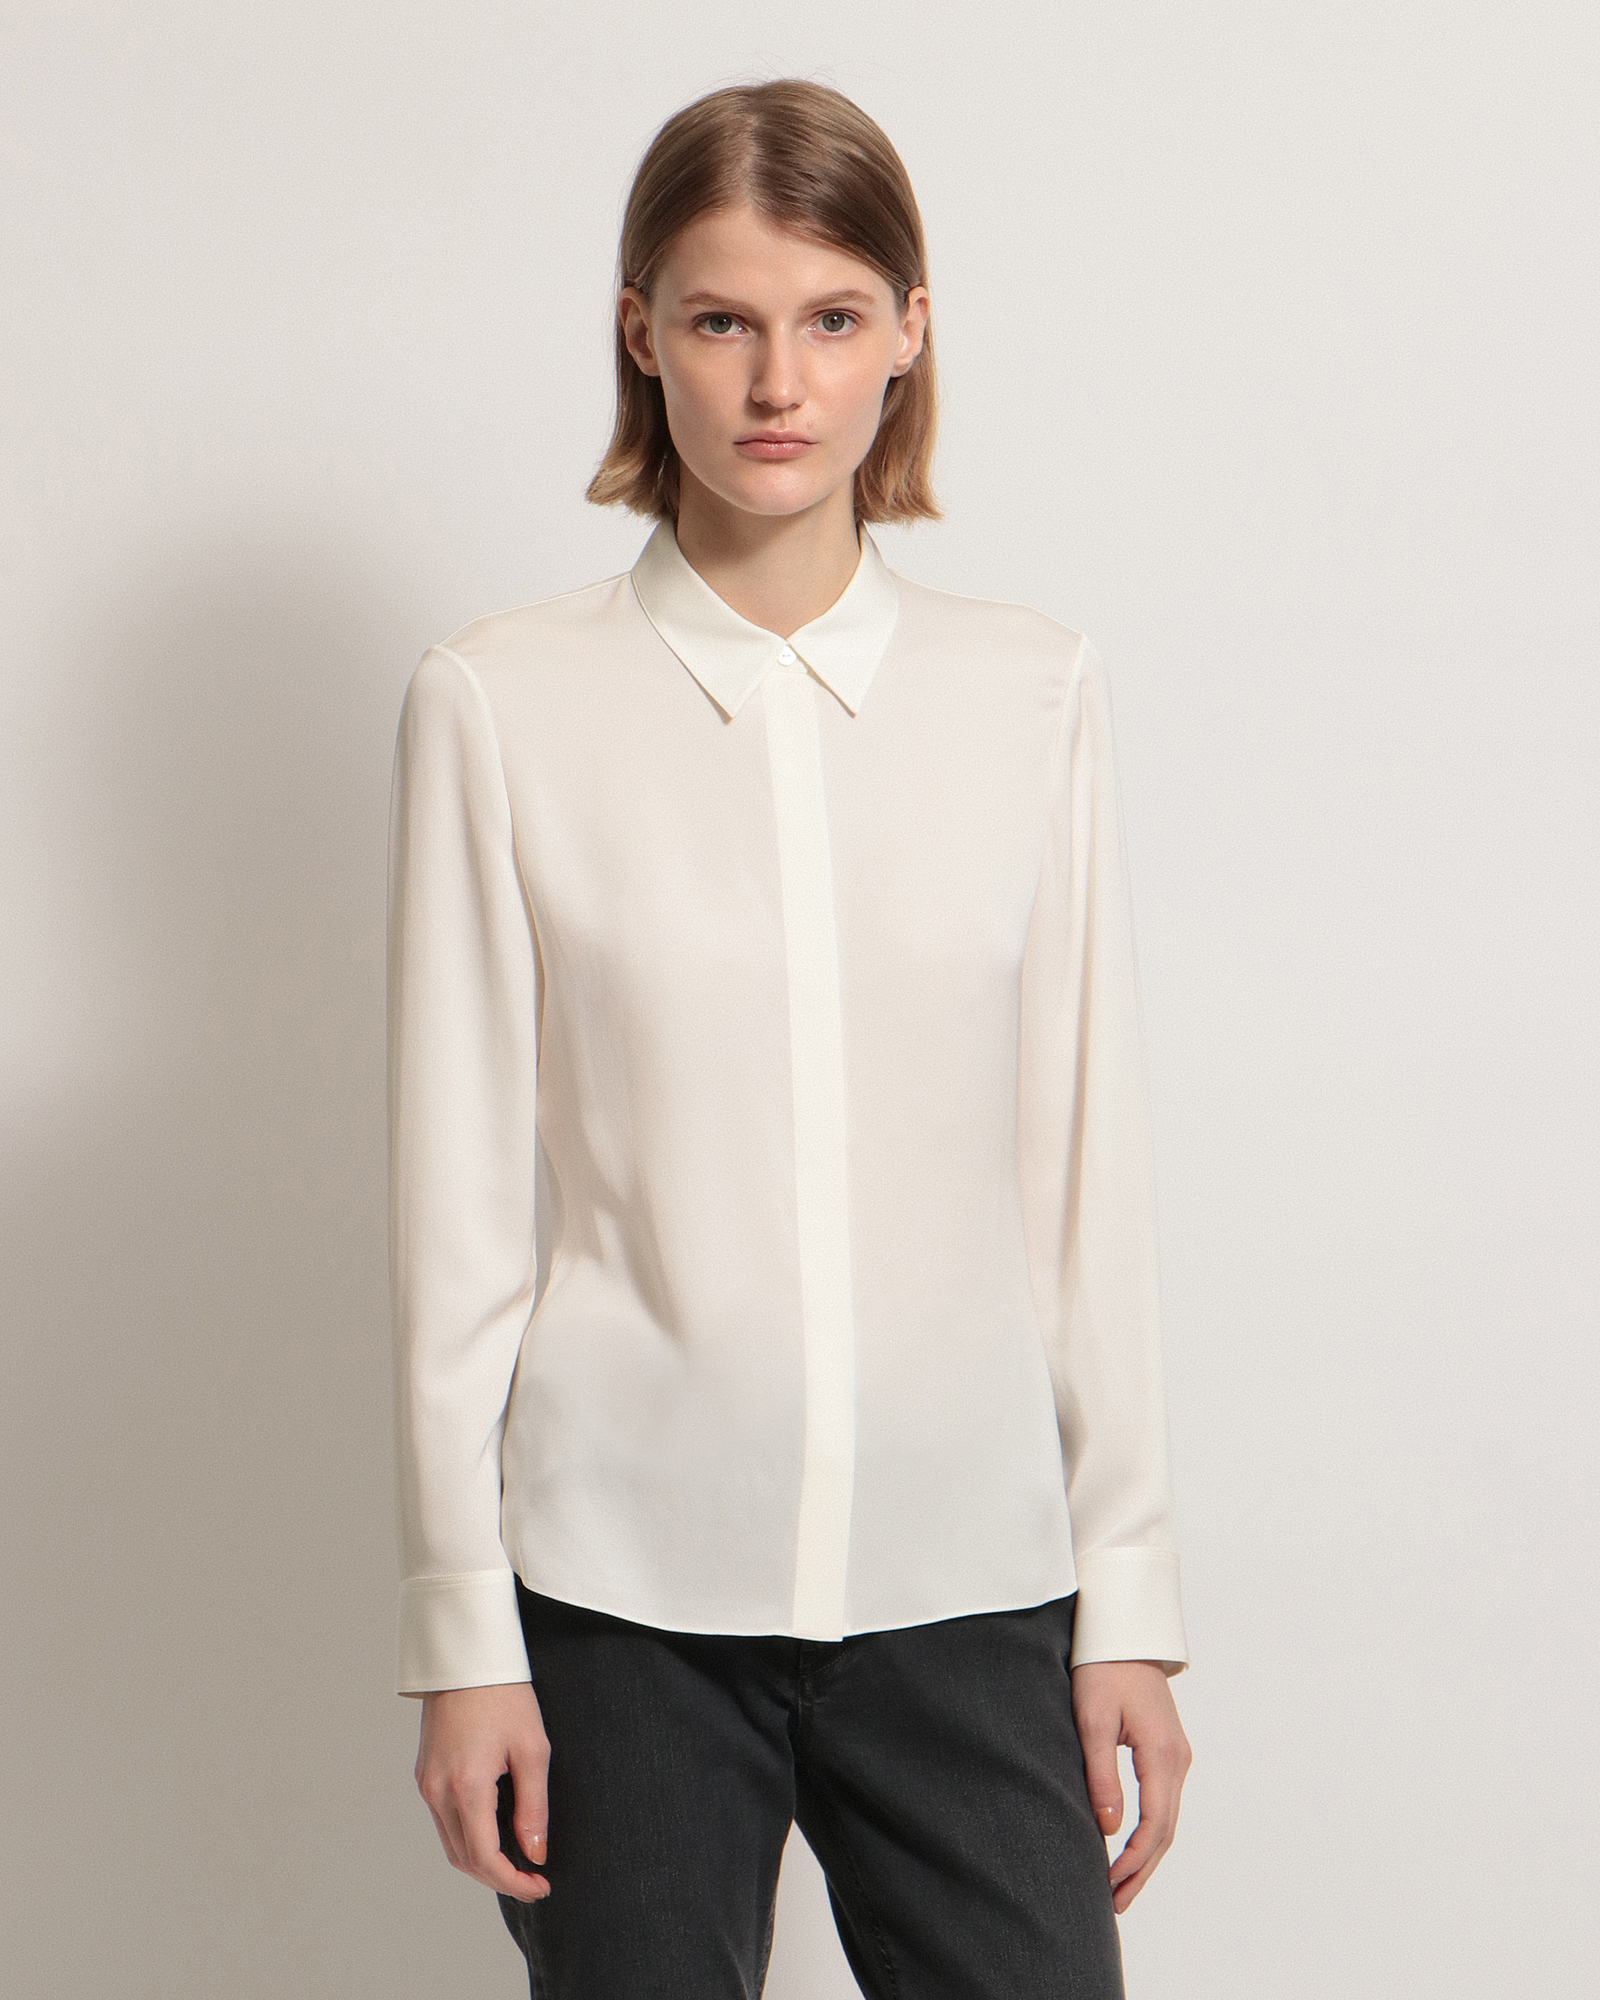 Modern GGT Classic Fitted Shirt | WOMEN（レディース）｜Theory 公式 